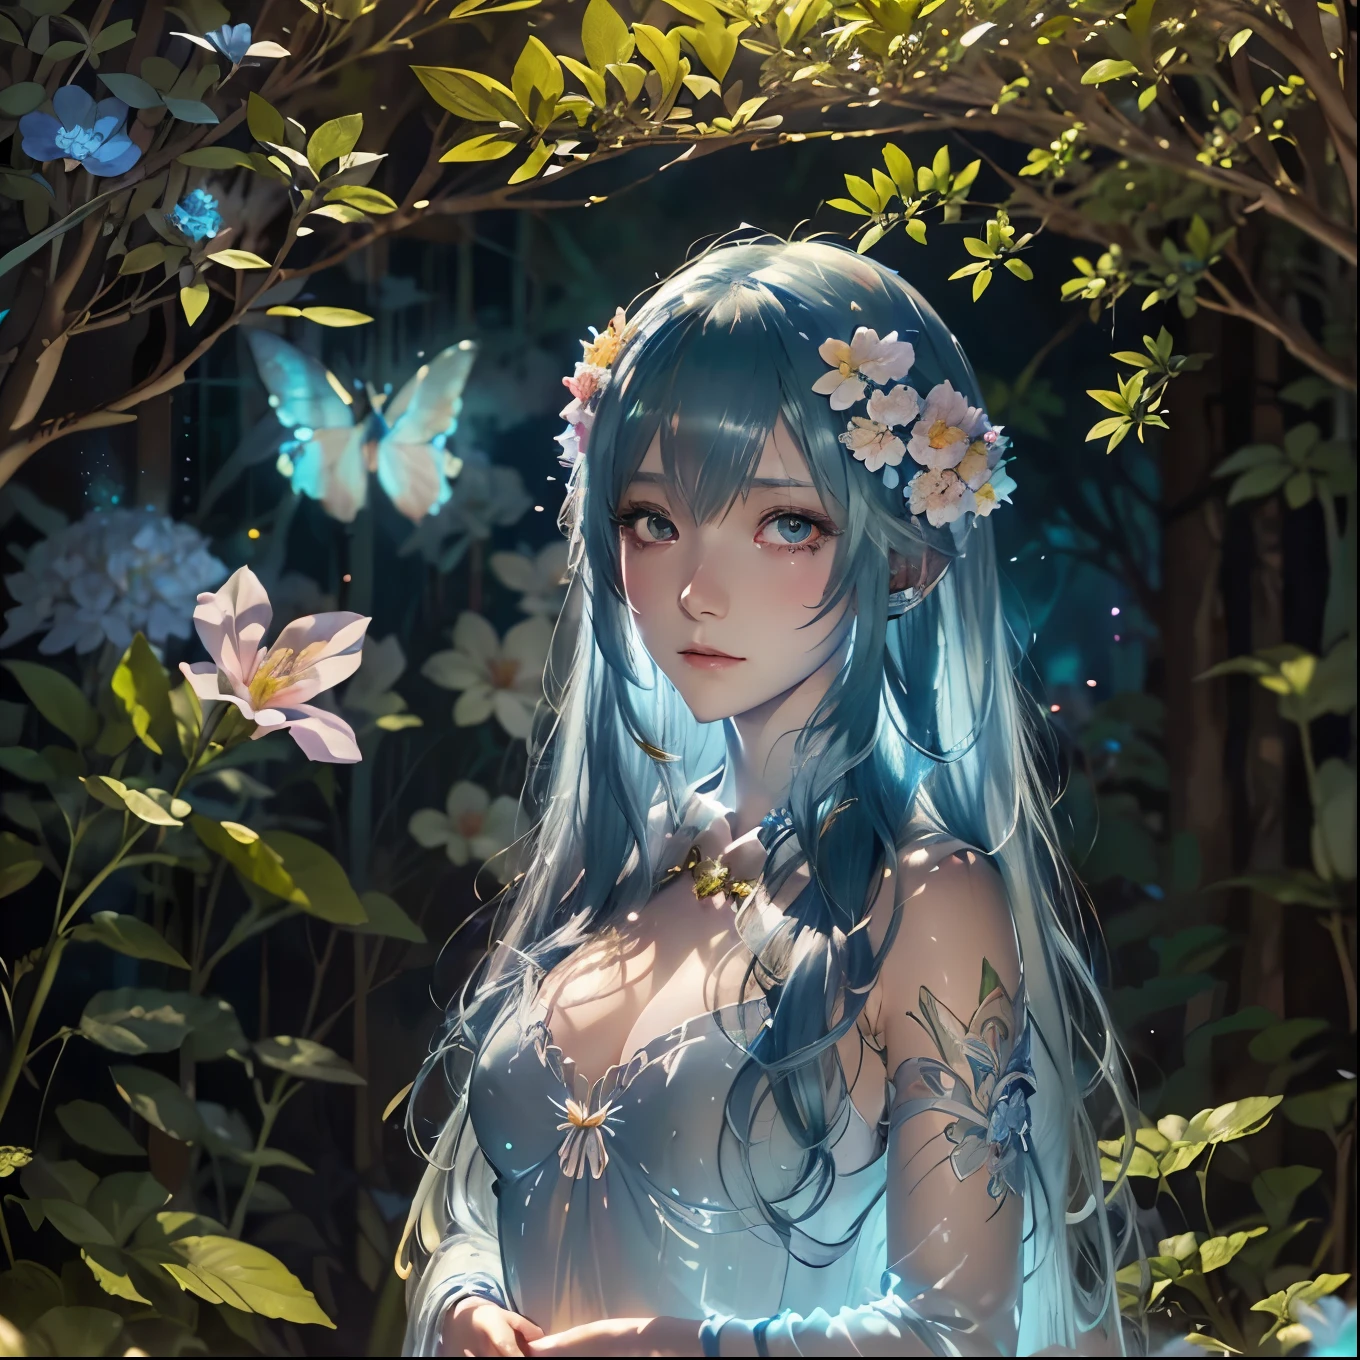 Anime girl with blue hair and flowers in her hair, Detailed digital anime art, Alphonse Mucha and Rosdrose, Exquisite digital illustrations, Beautiful artwork illustration, Digital art on pixiv, Inspired by Ross Tran, Very detailed fan art, Lostland Style, Beautiful digital illustrations, Moebius + Barbaric + Wow, Ross Tran style, Anime fantasy illustration